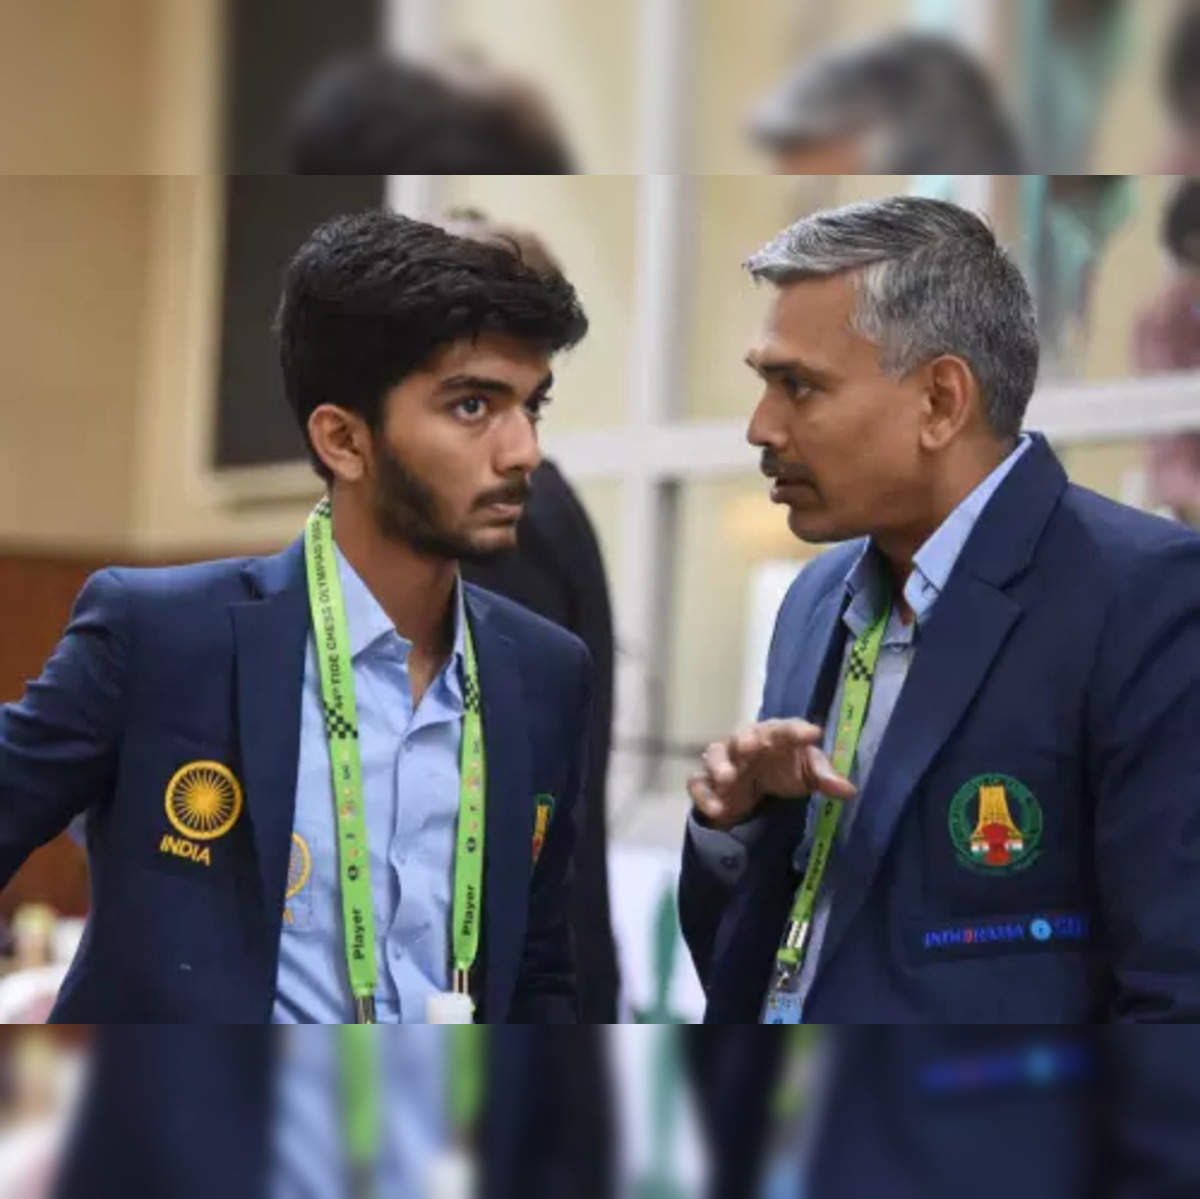 Indian GM D Gukesh creates history; becomes youngest to beat